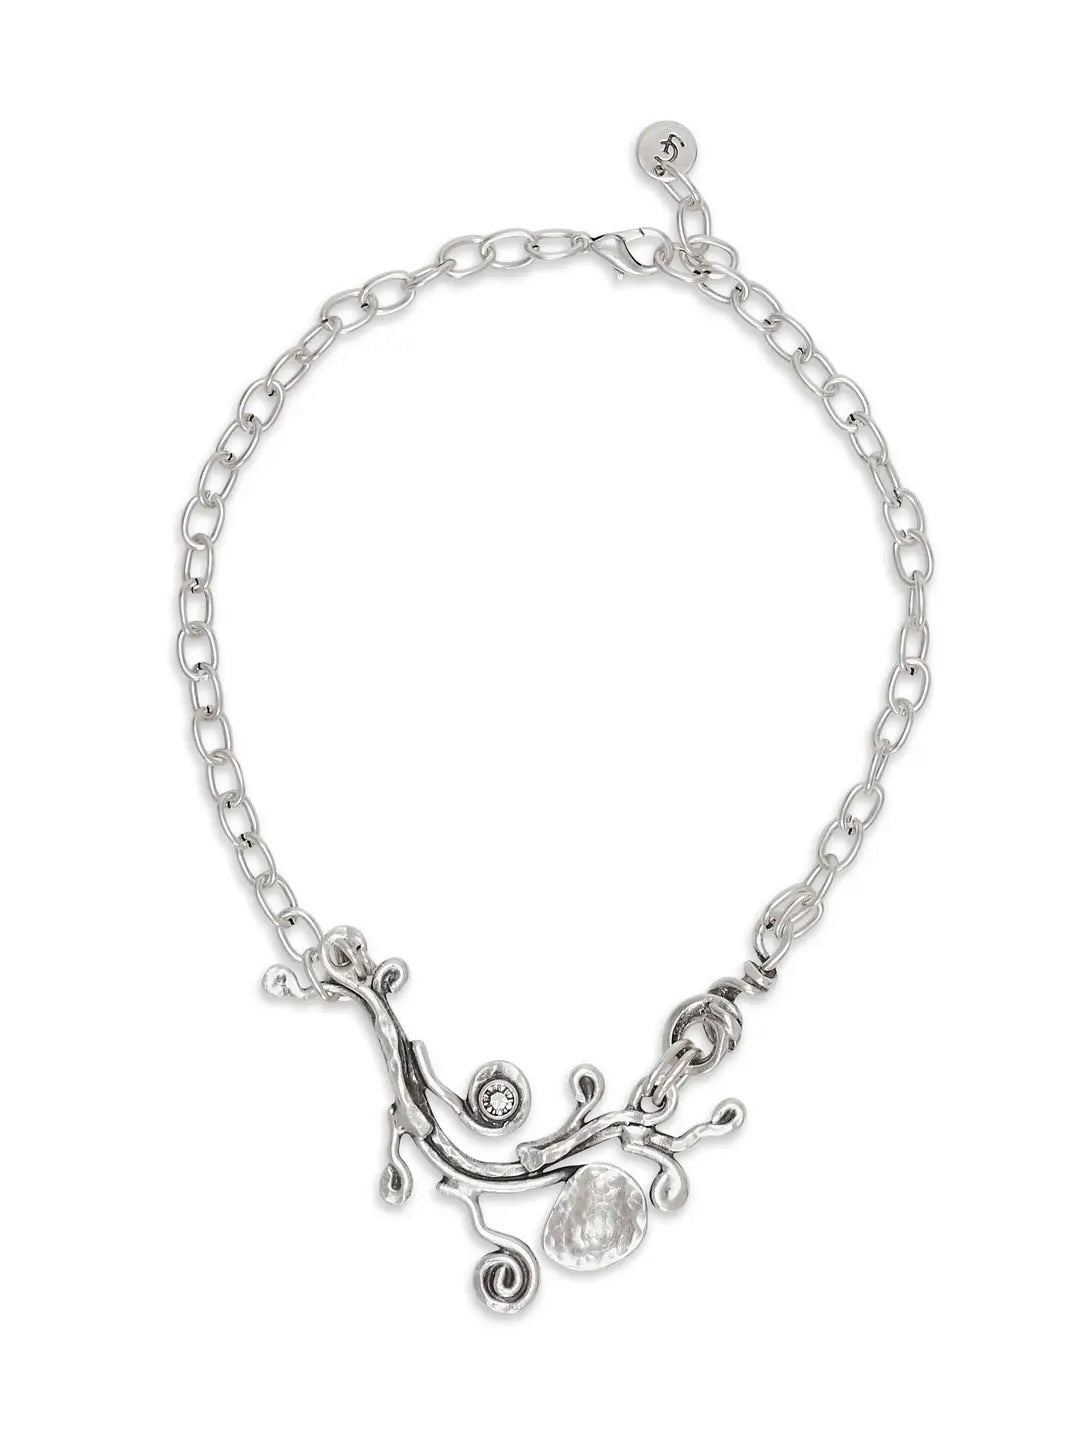 TWIG & CRYSTAL PEWTER NECKLACE